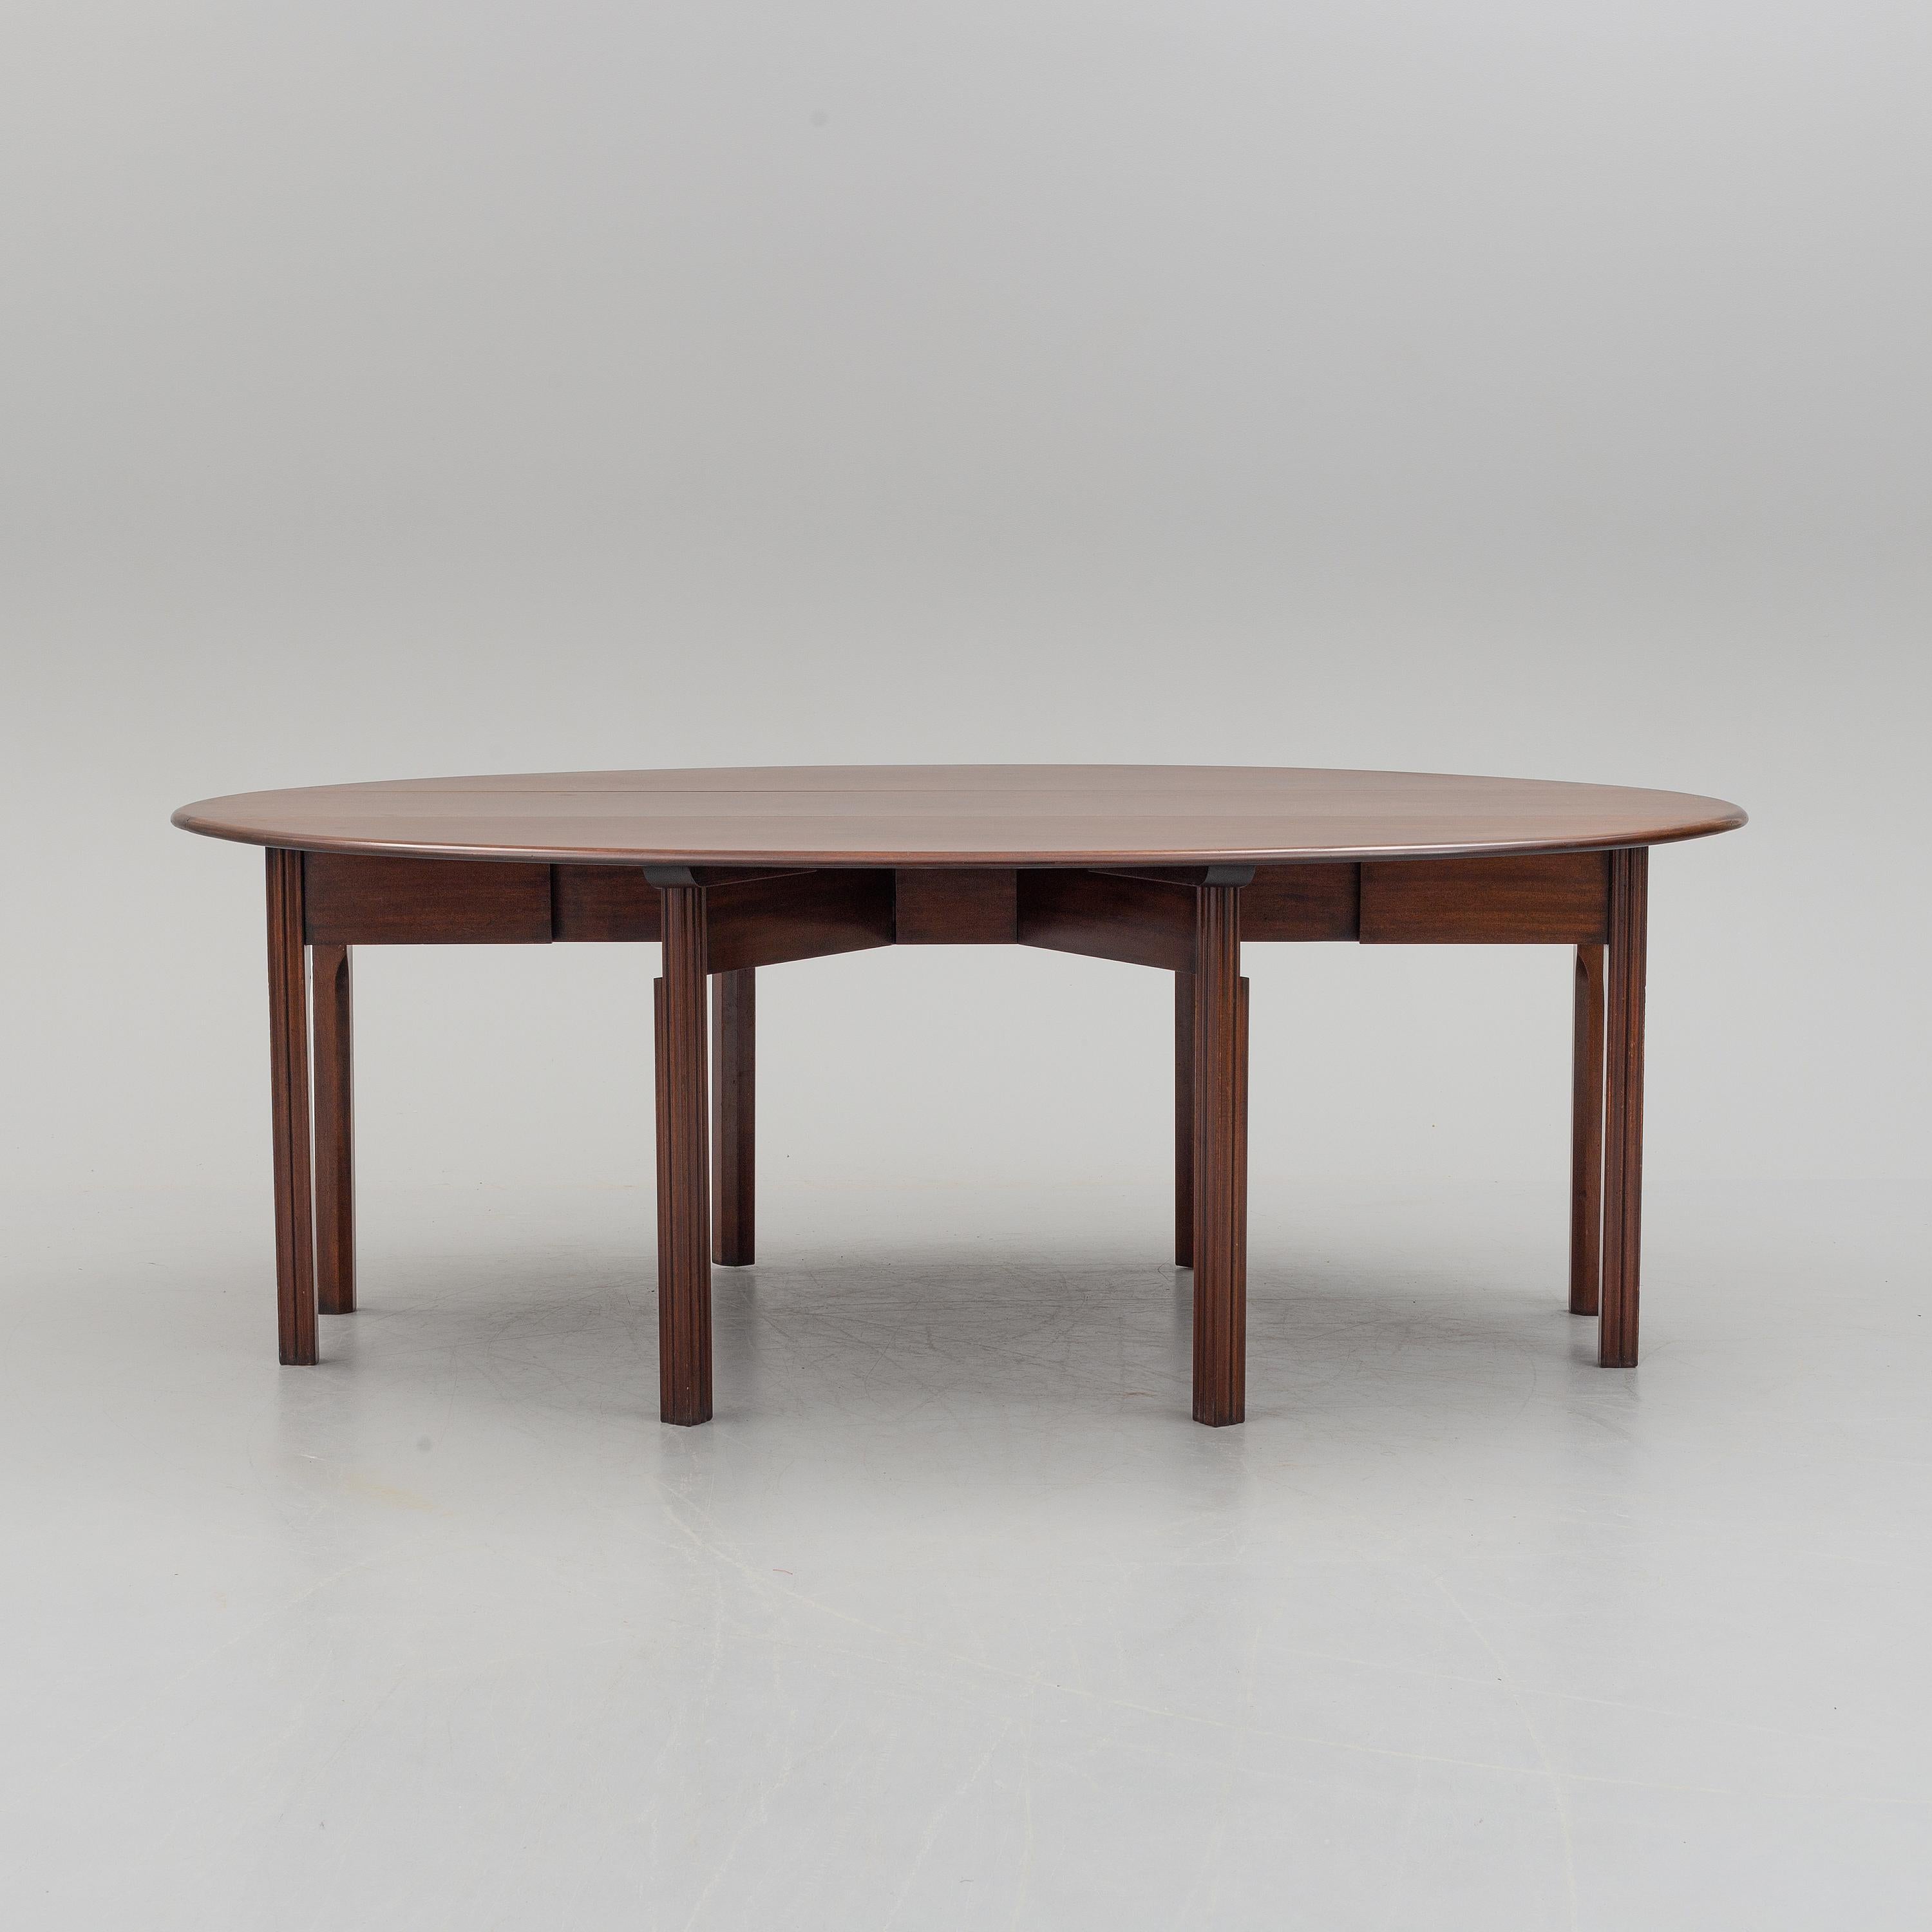 Large and heavy Georgian style gate leg dining table
- solid wood
- can be used as a sofa back table or long console
Measures: L 214 cm x W 136 (47+42+47) cm, H 74 cm
NK is a Swedish company but according to the label this table is 